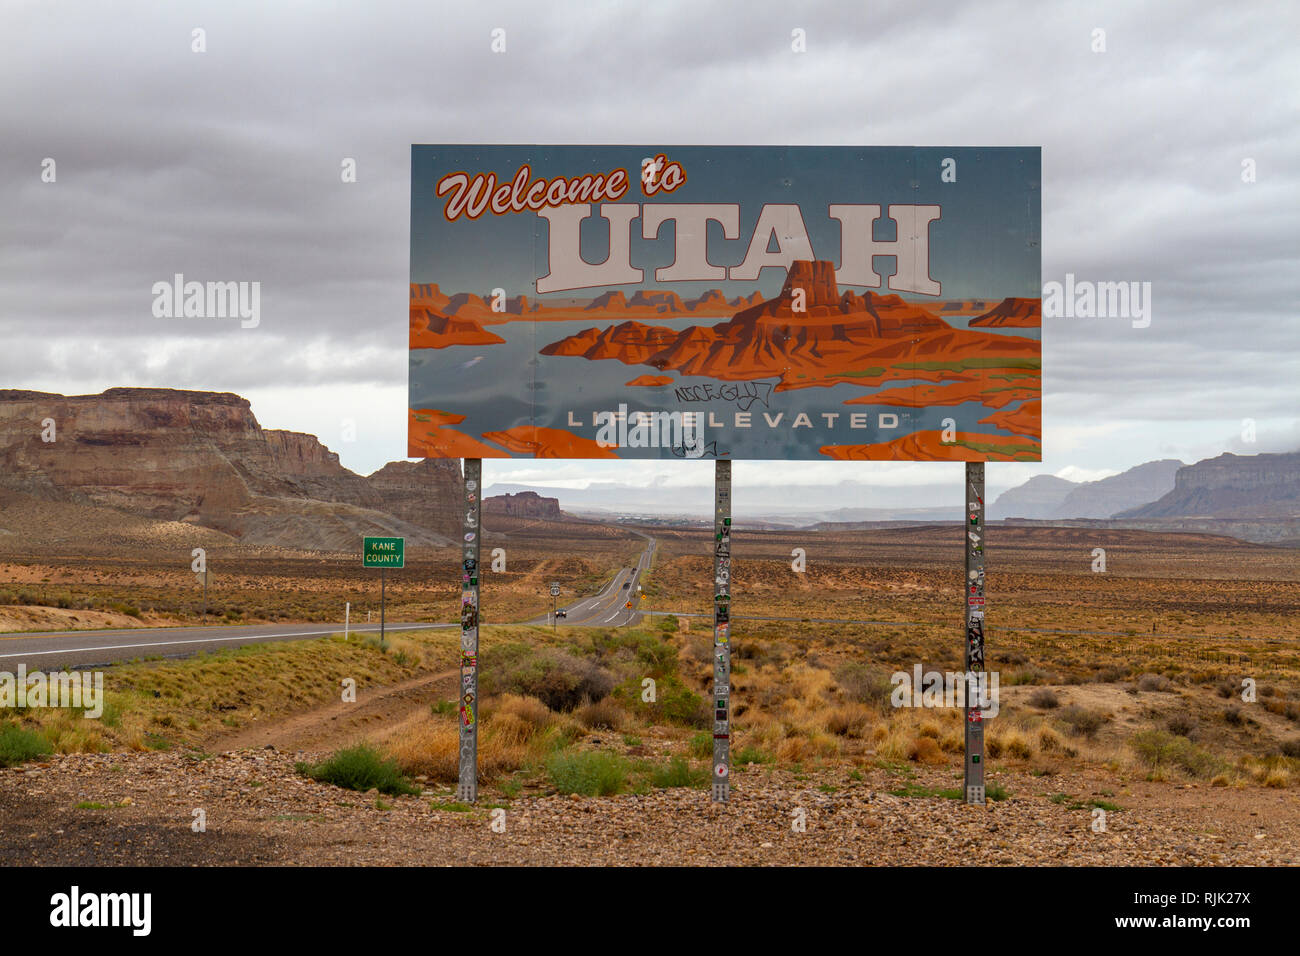 'Welcome to Utah' road side sign advising drivers they are entering the state of Utah, United States. Stock Photo